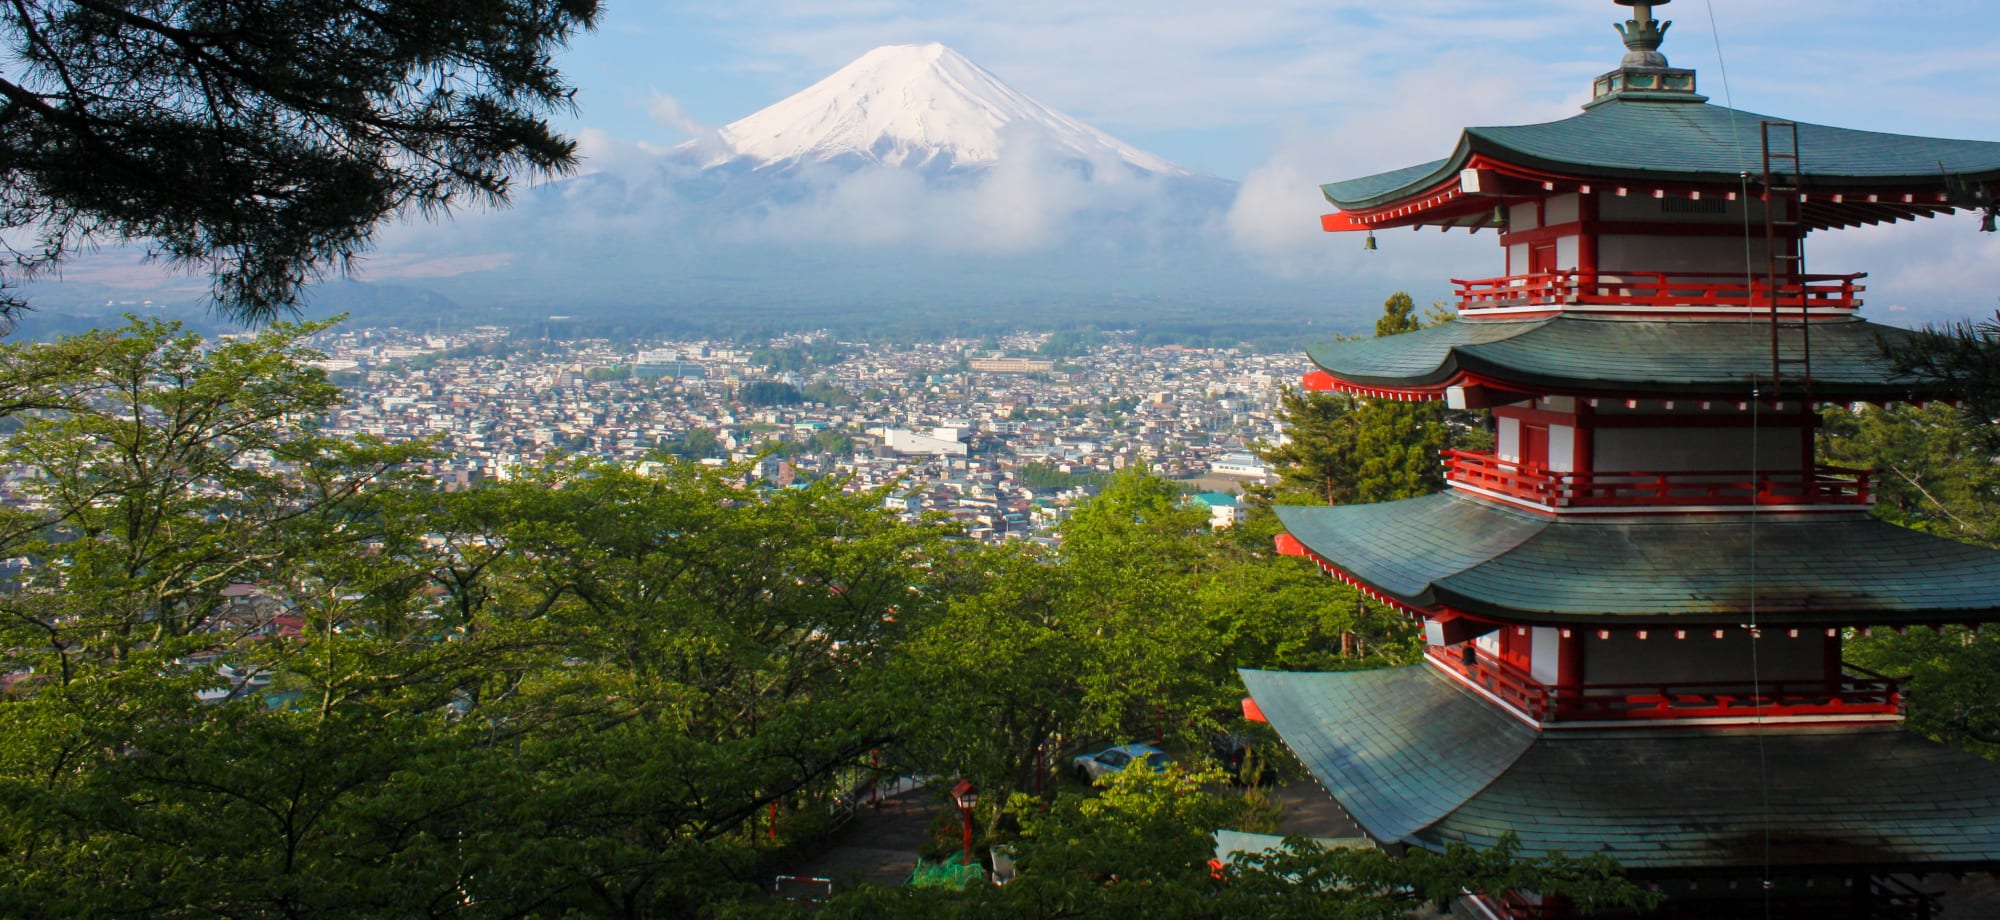 A pagoda overlooks a city and a snow-covered mountain. 